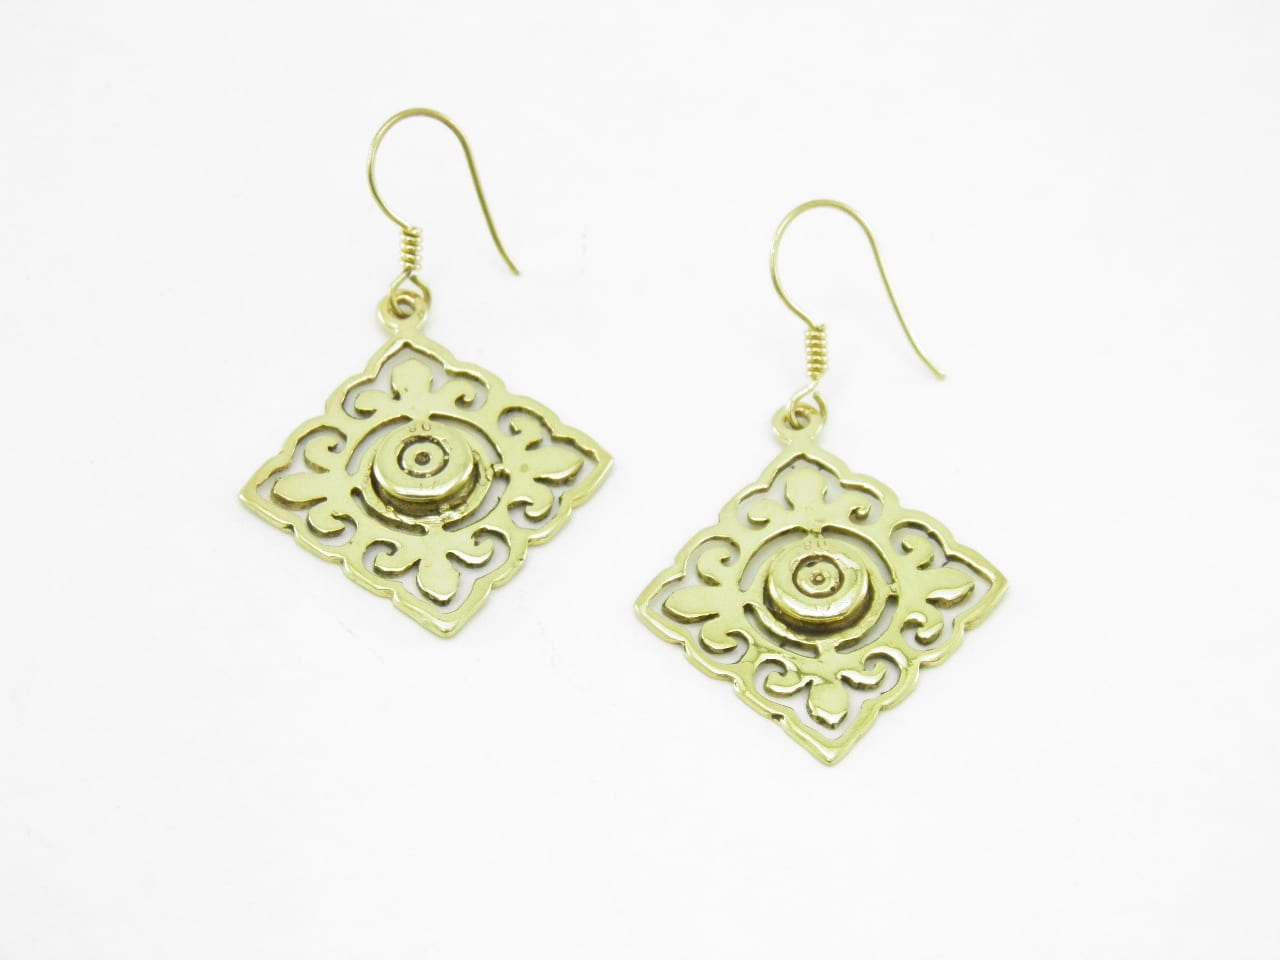 Earrings Tile and cartridge base – recycled brass